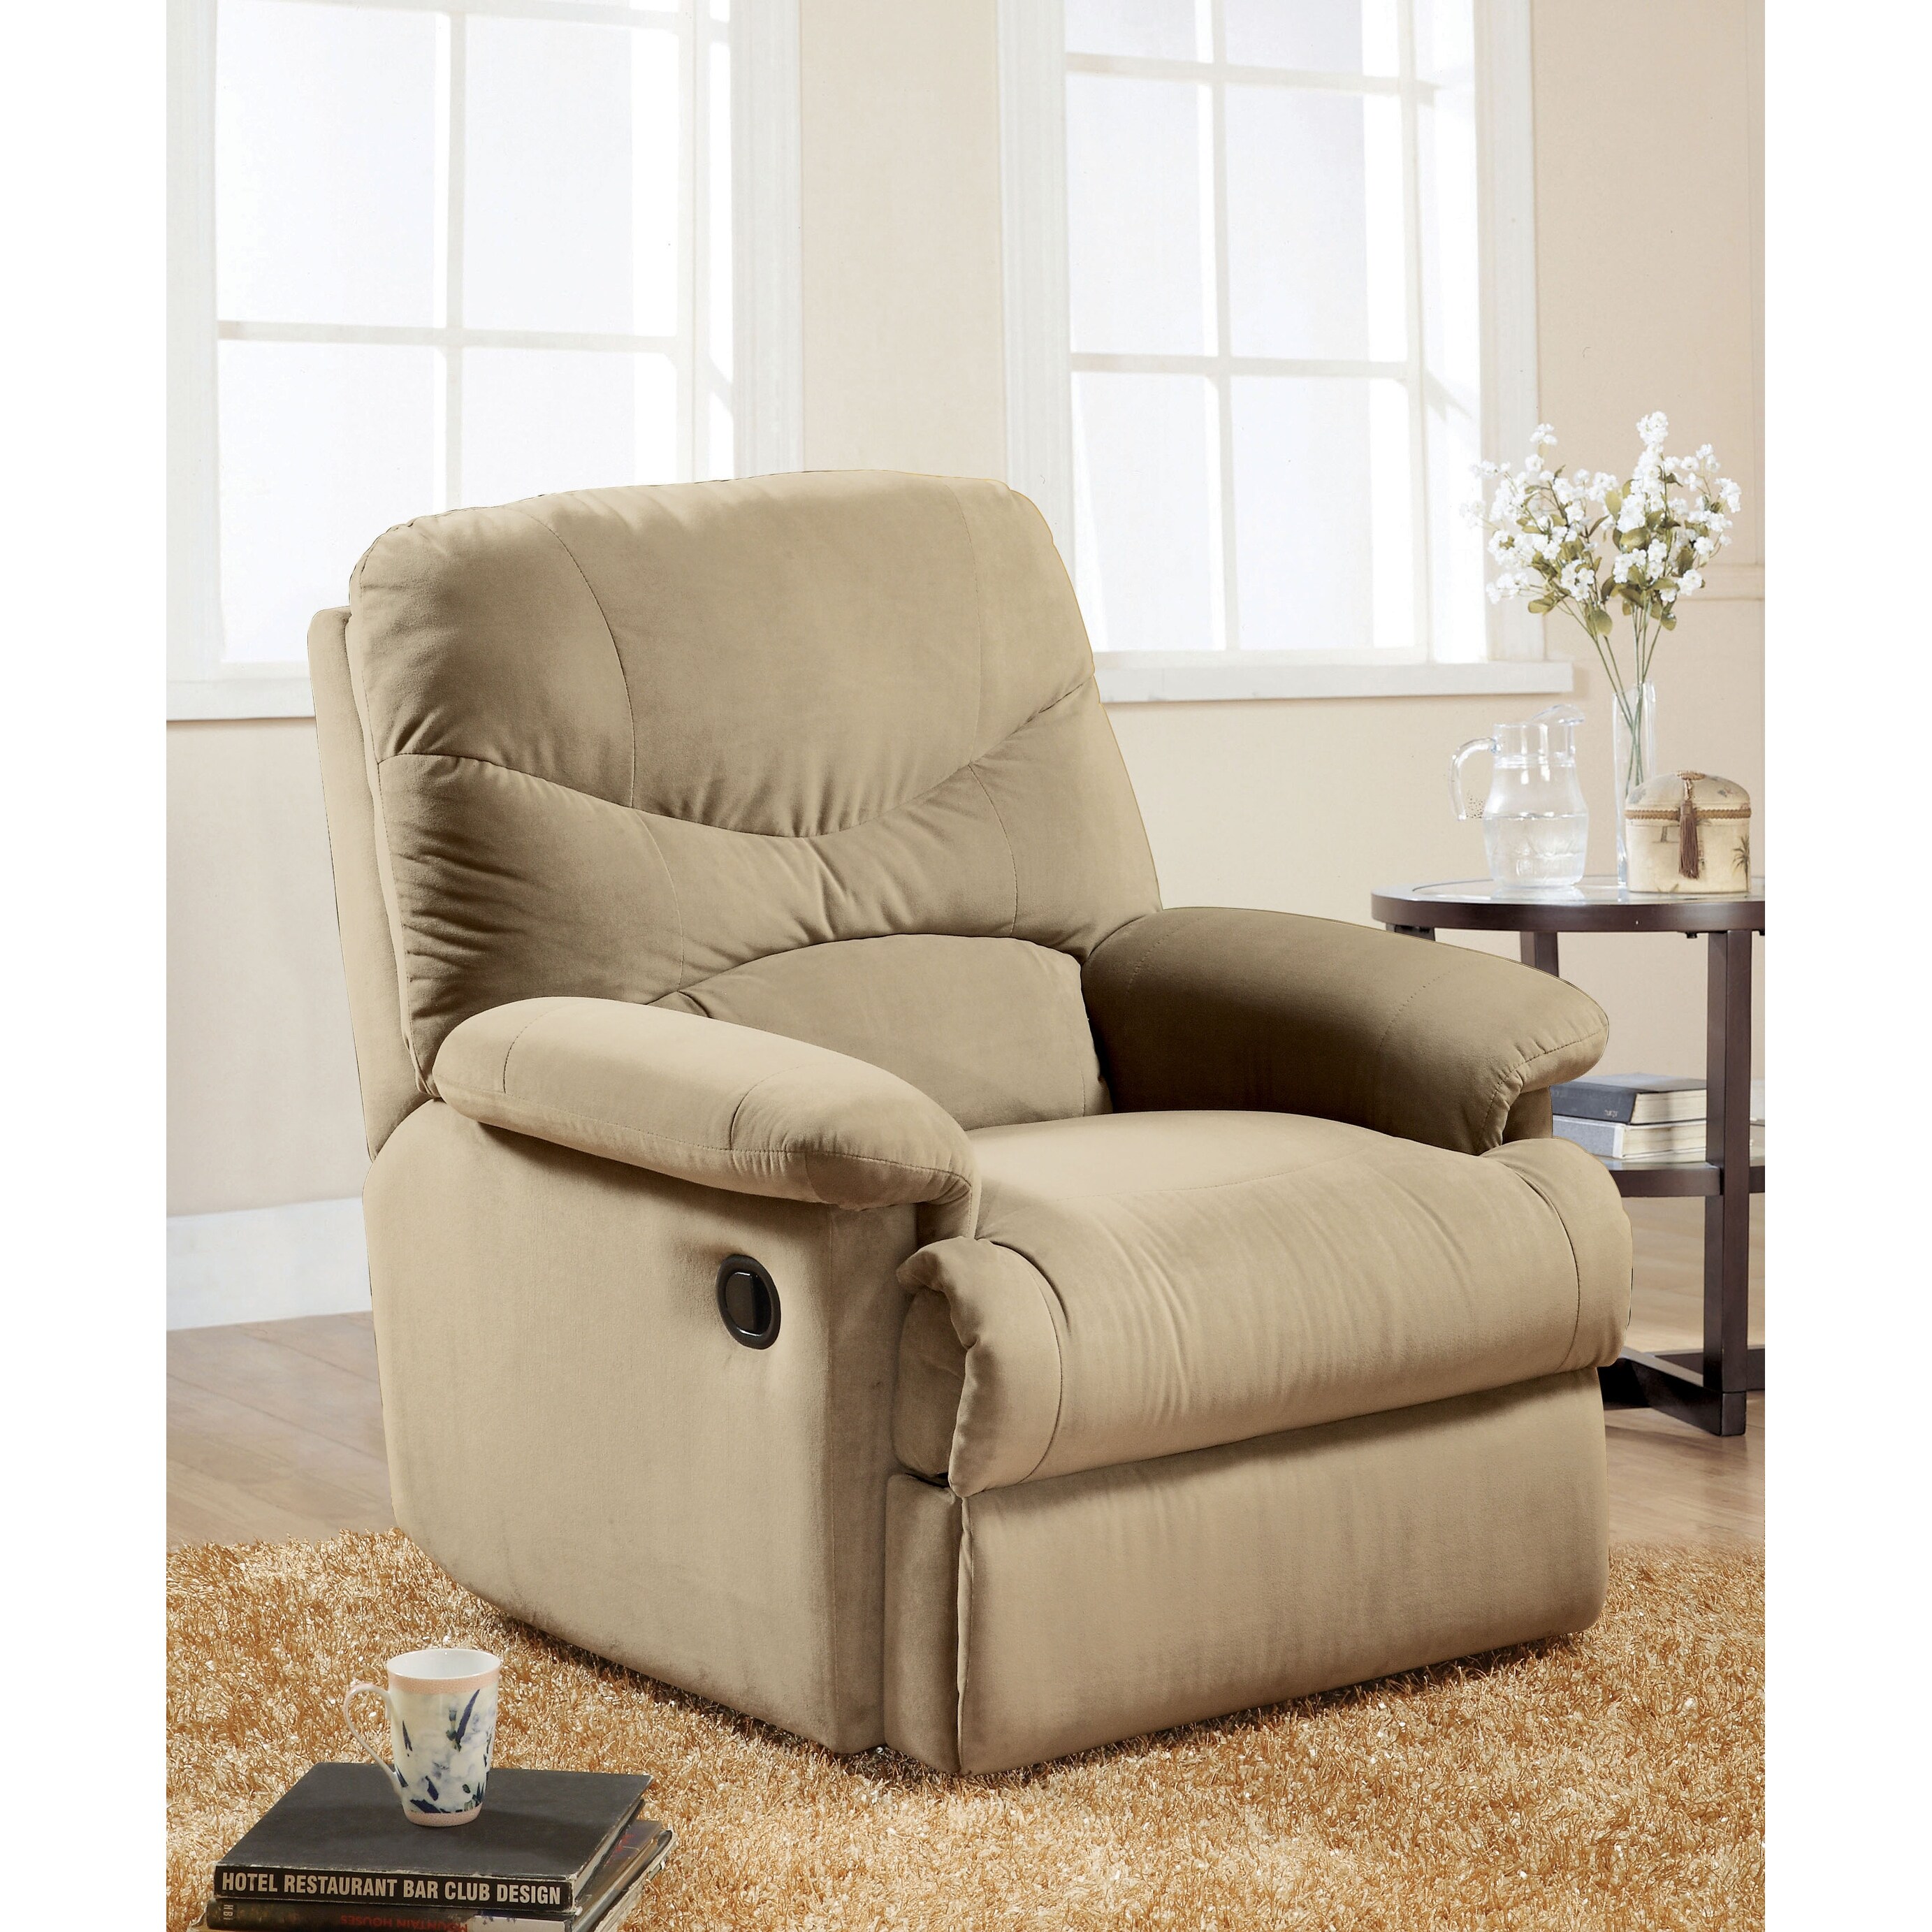 https://ak1.ostkcdn.com/images/products/is/images/direct/9bc7517b2575356535aaeb5566c6d4b3b95286a8/Microfiber-Adjustable-Recliner-Chair-with-Footrest-Extension-%26-Pillow-Top-Arms%2C-Cushioned-Single-Sofa-for-Livingroom.jpg